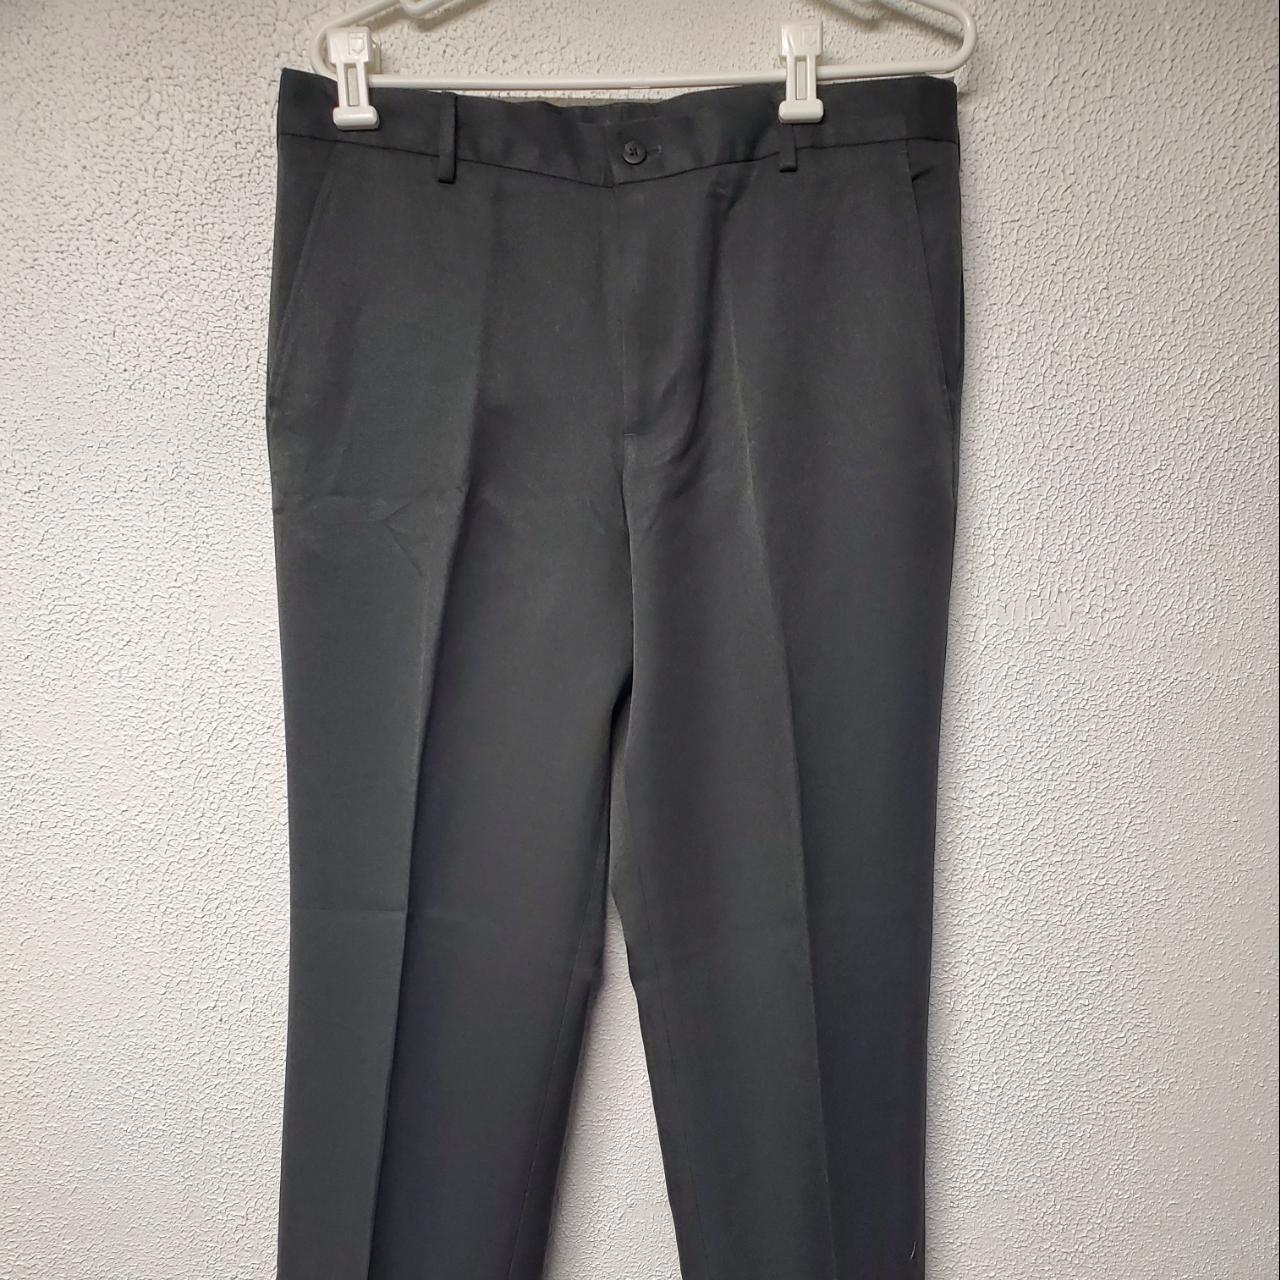 Elevate your style with these classic dress pants... - Depop